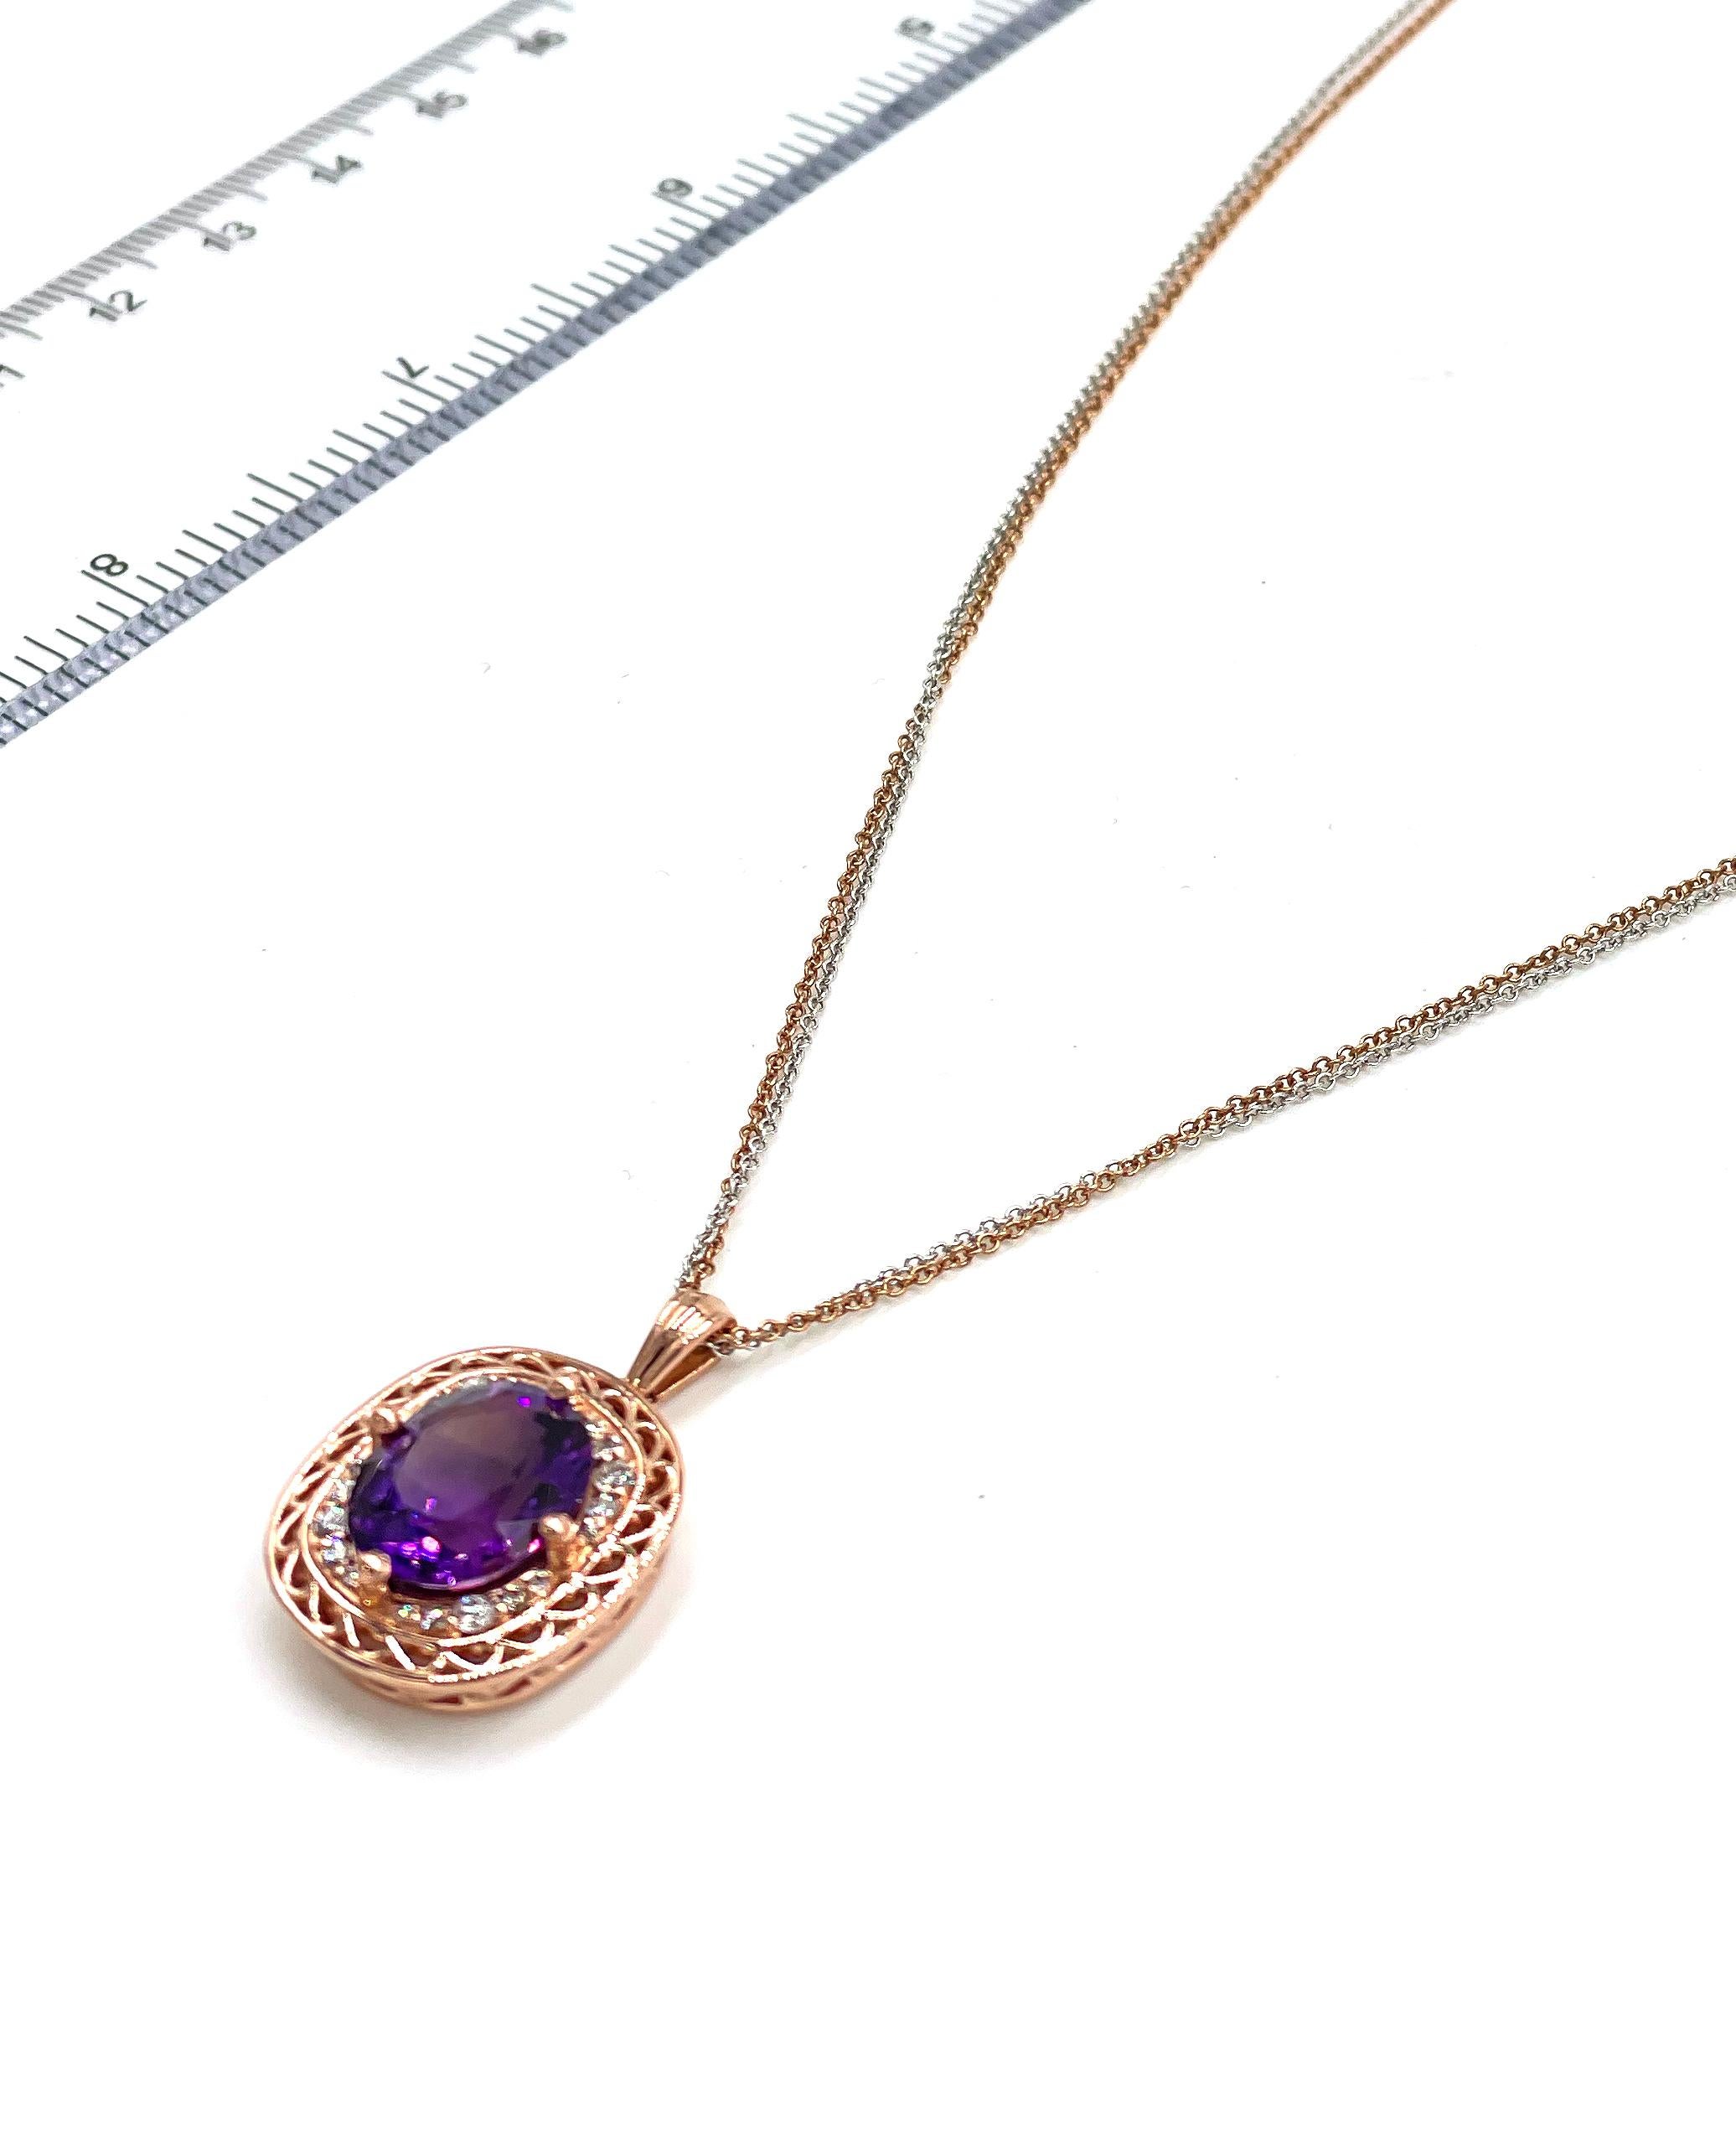 Contemporary 14k Rose and White Gold Pendant Necklace with Amethyst and Diamonds For Sale